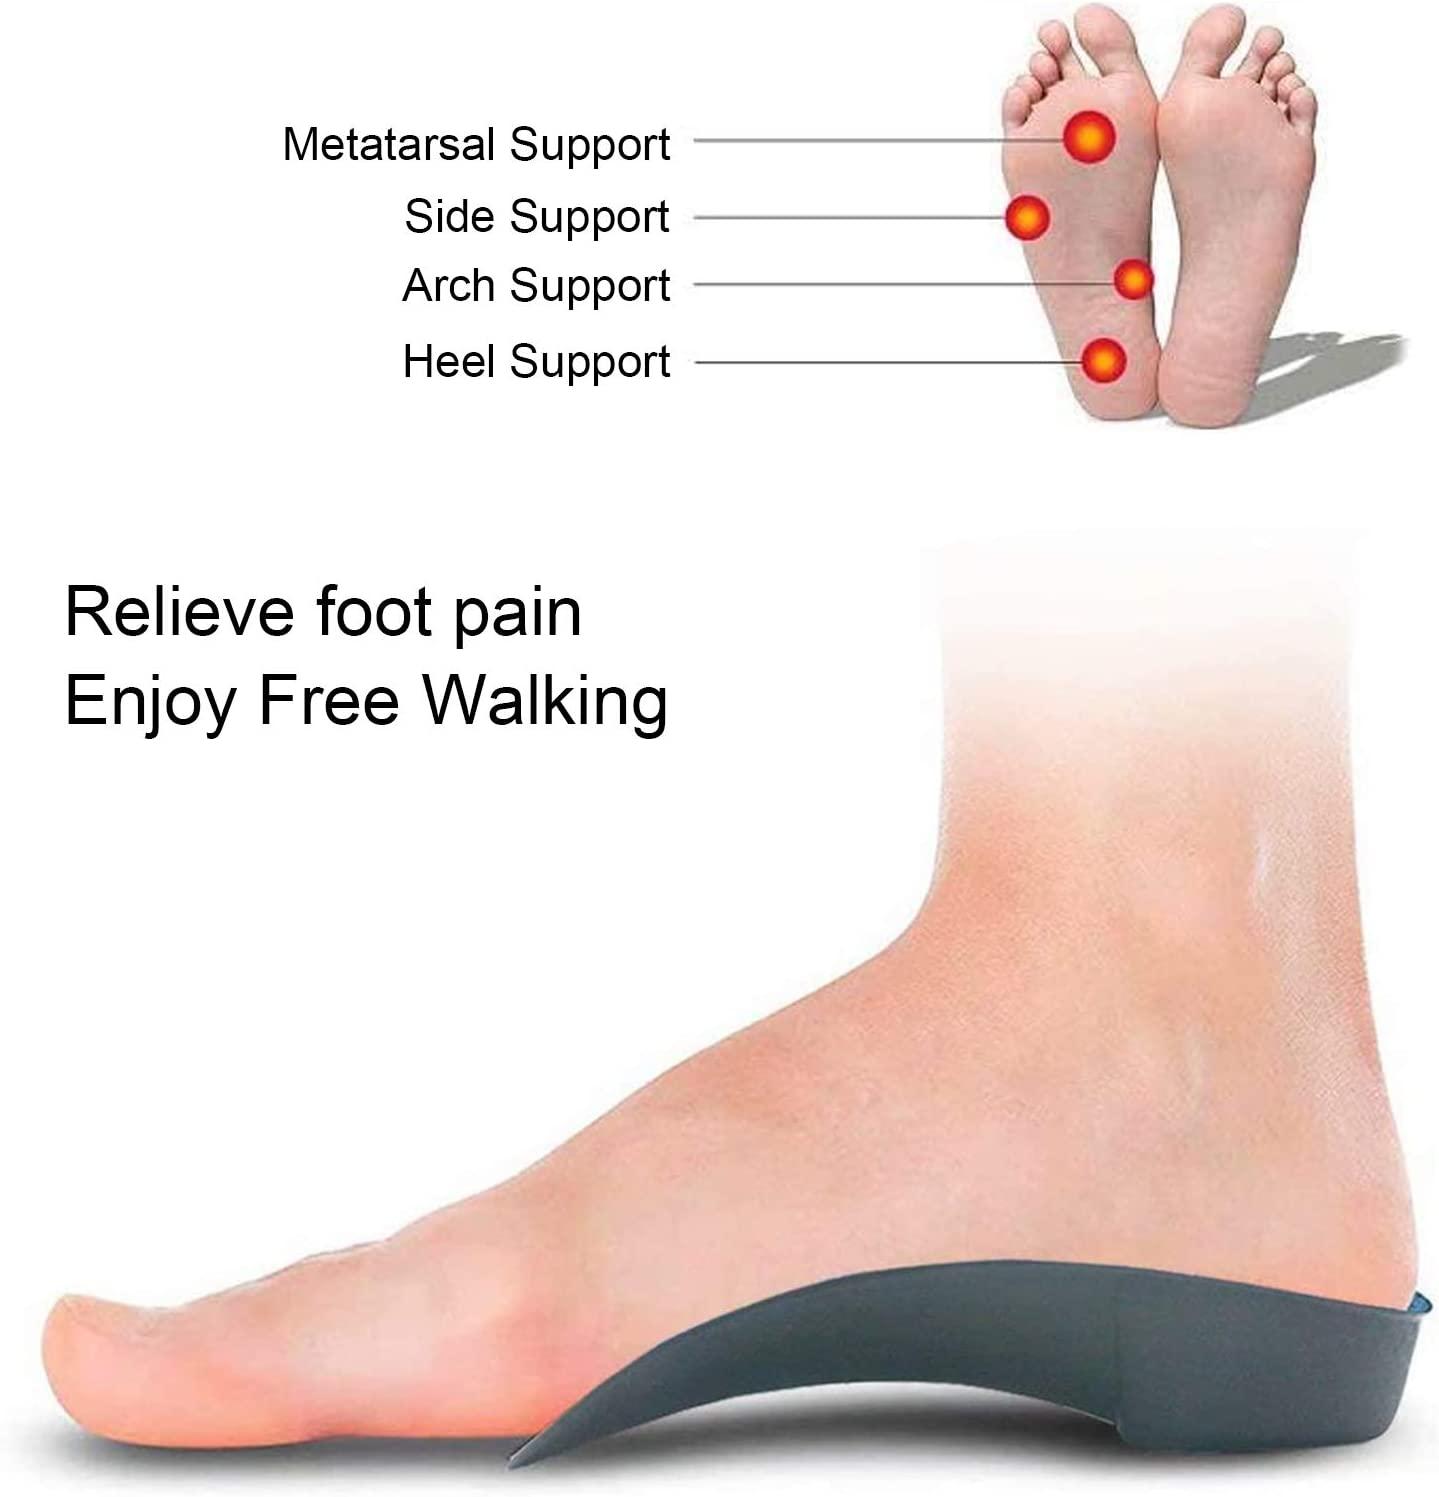 RooRuns FitFeet Orthotic Inserts 3/4 Length, High Arch Support Foot Insoles  for Over-Pronation, Plantar Fasciitis, Flat Feet - Shoe Inserts for  Walking, Running Men and Women S | Men's 5-6, Women's 6-7